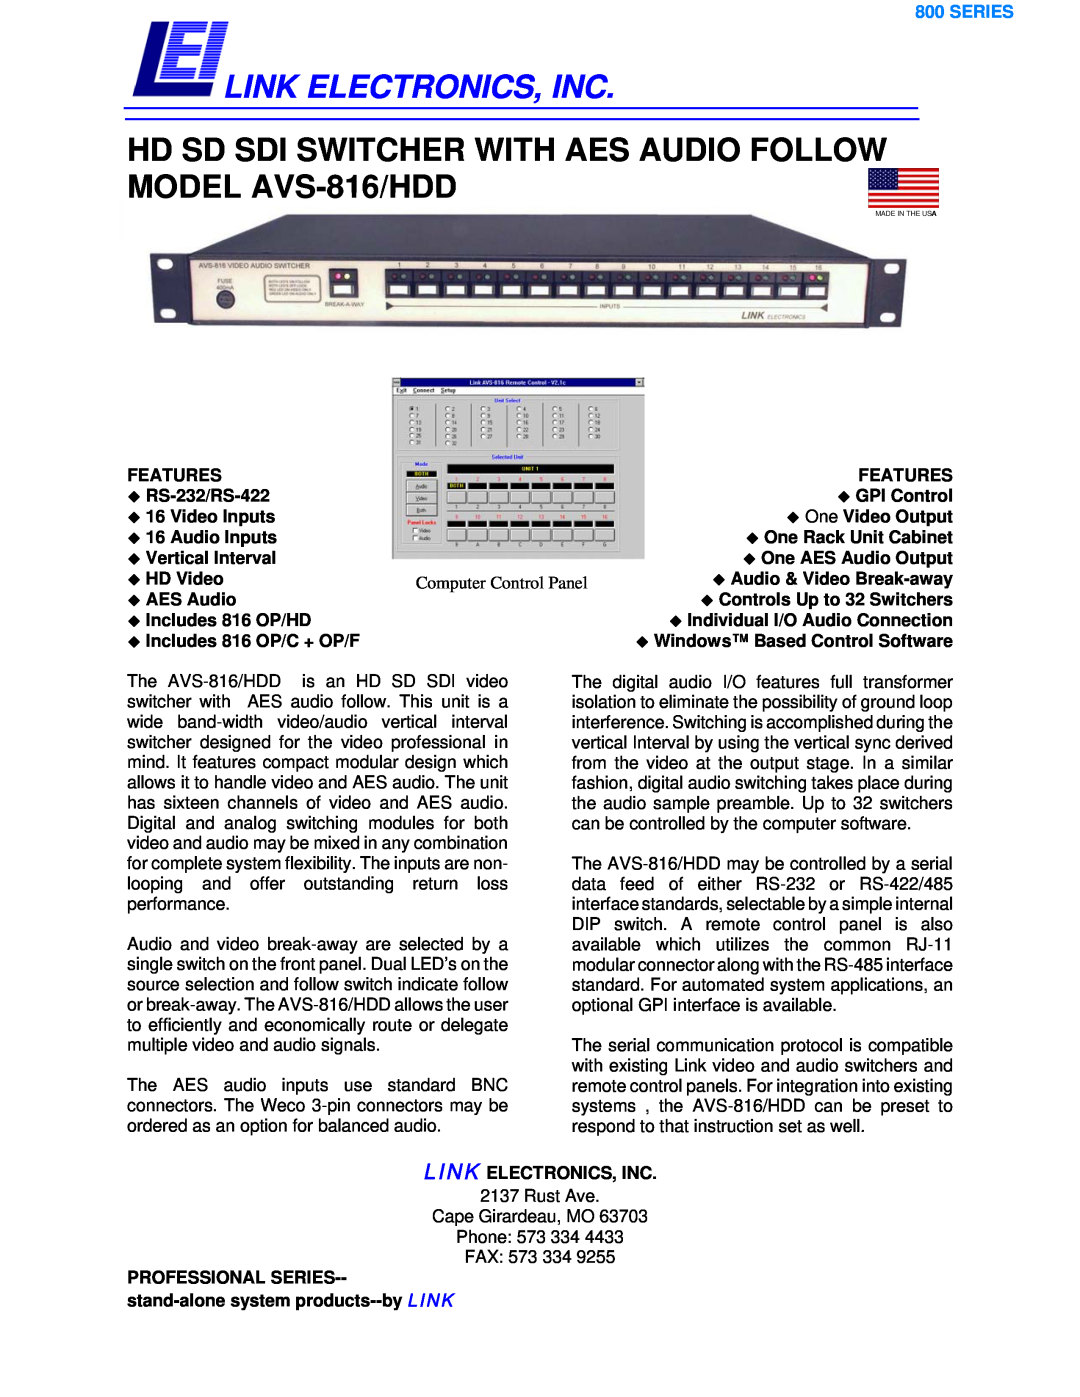 Link electronic manual Link Electronics, Inc, HD SD SDI SWITCHER WITH AES AUDIO FOLLOW MODEL AVS-816/HDD, Series 